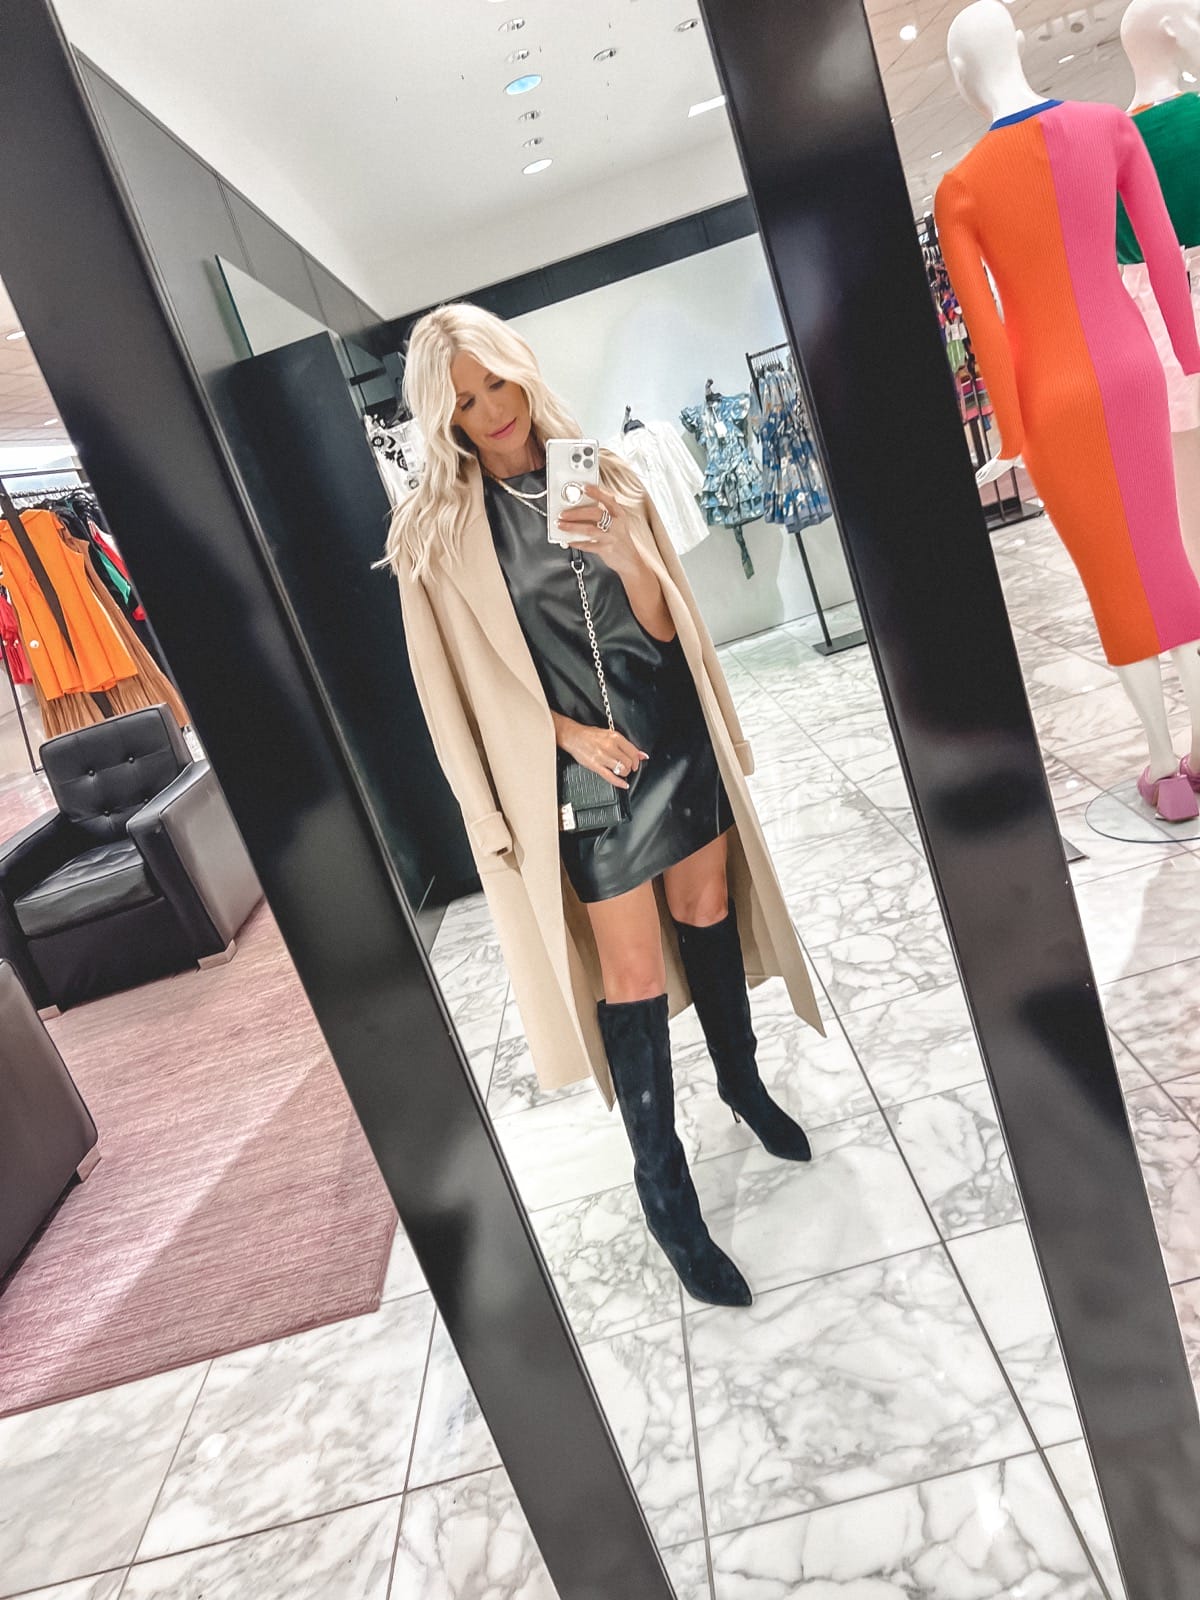 Over 40 Dallas fashion blogger wearing faux leather dress, veronica beard boots and camel jacket